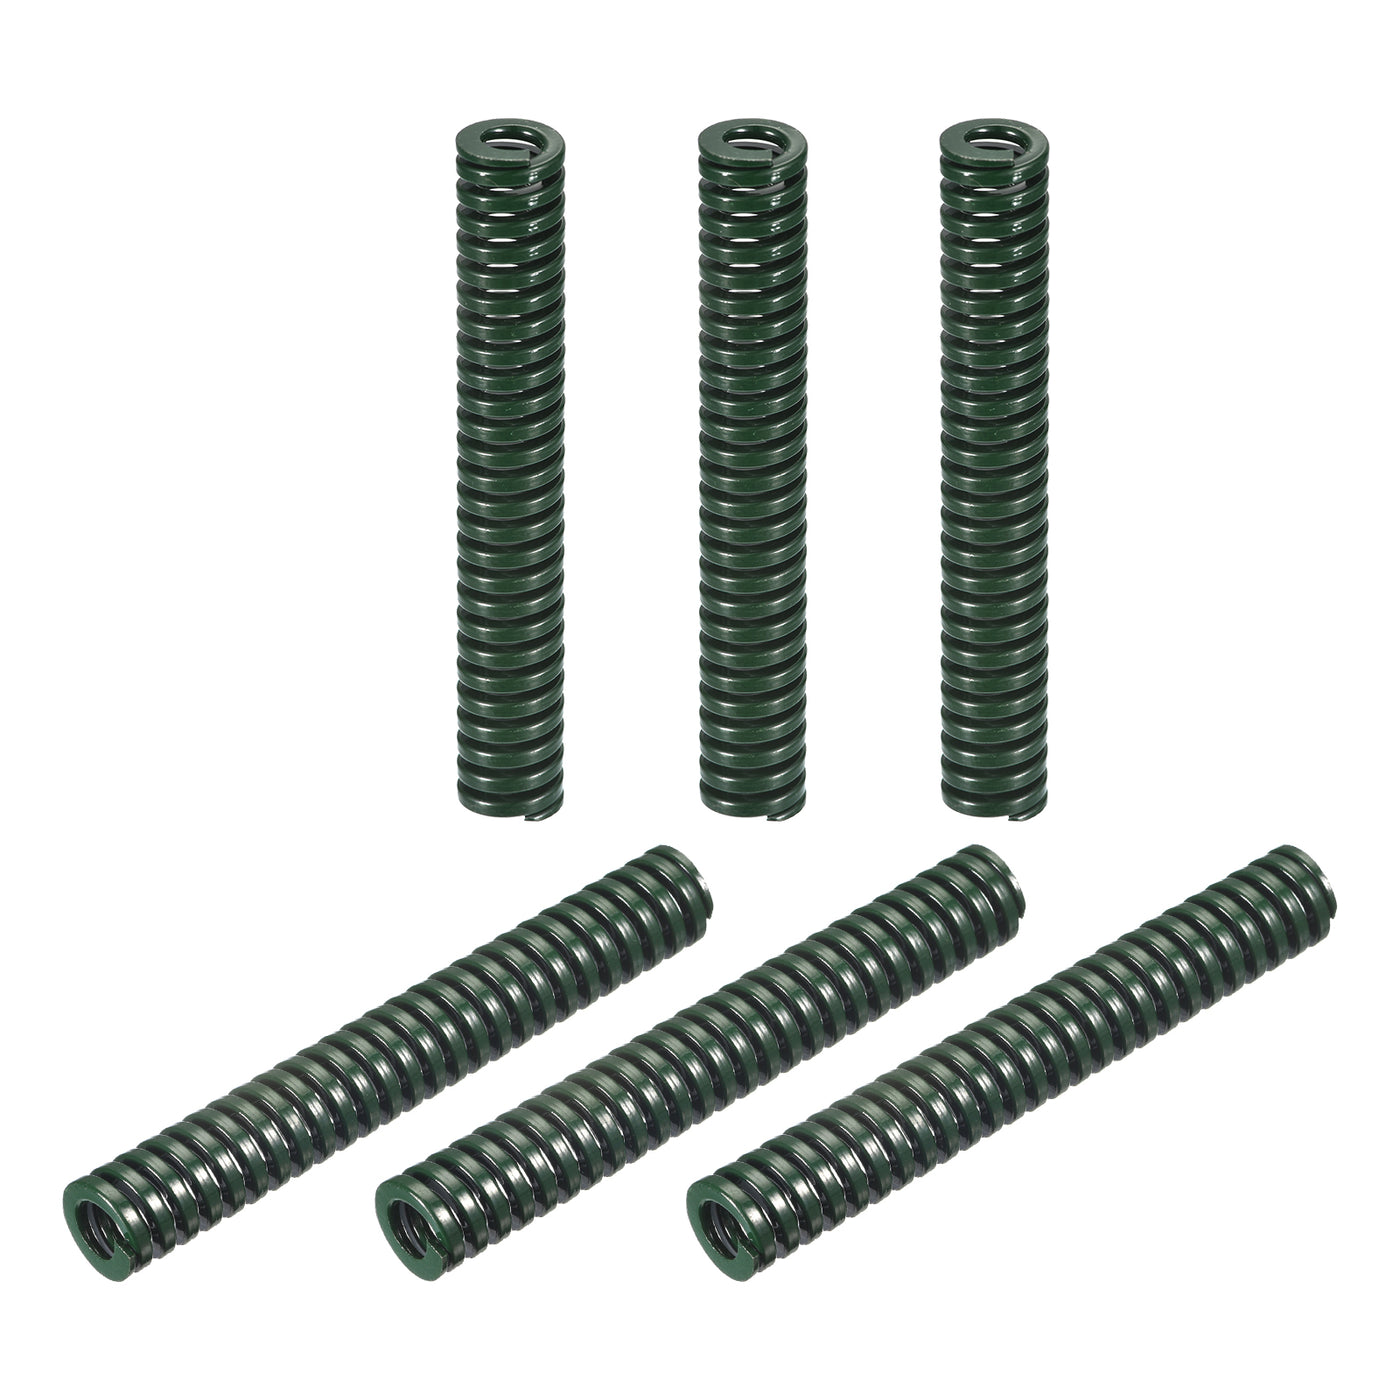 uxcell Uxcell 3D Printer Die Spring, 6pcs 14mm OD 100mm Long Spiral Stamping Compression Green